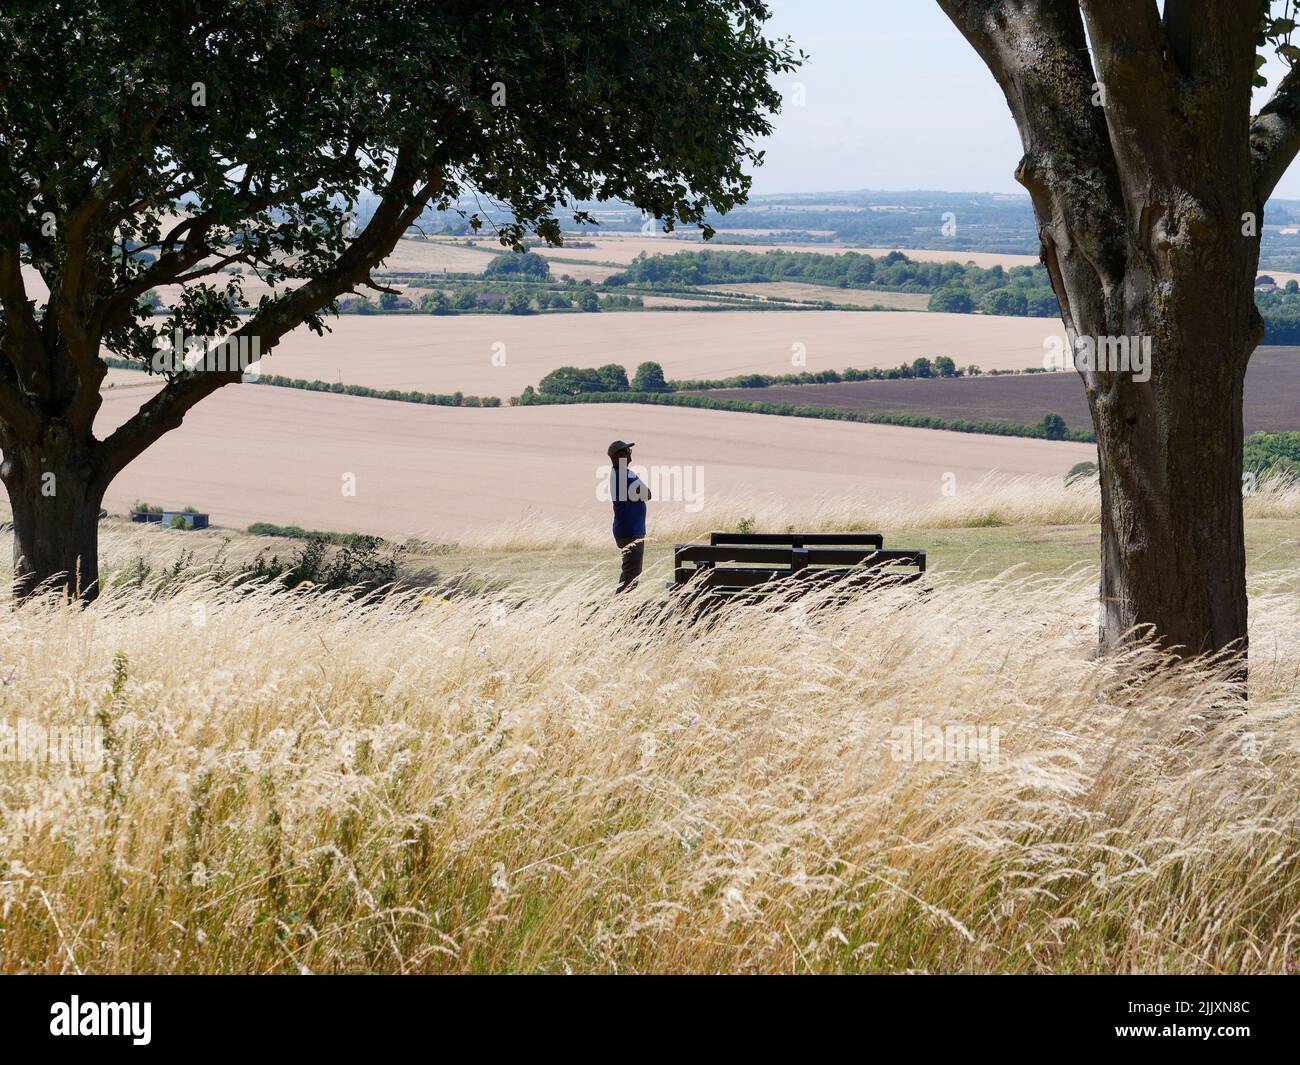 Countryside view of Whipsnade near Dunstable in Bedfordshire, England. Gentleman in silhouette admires the scenery Stock Photo